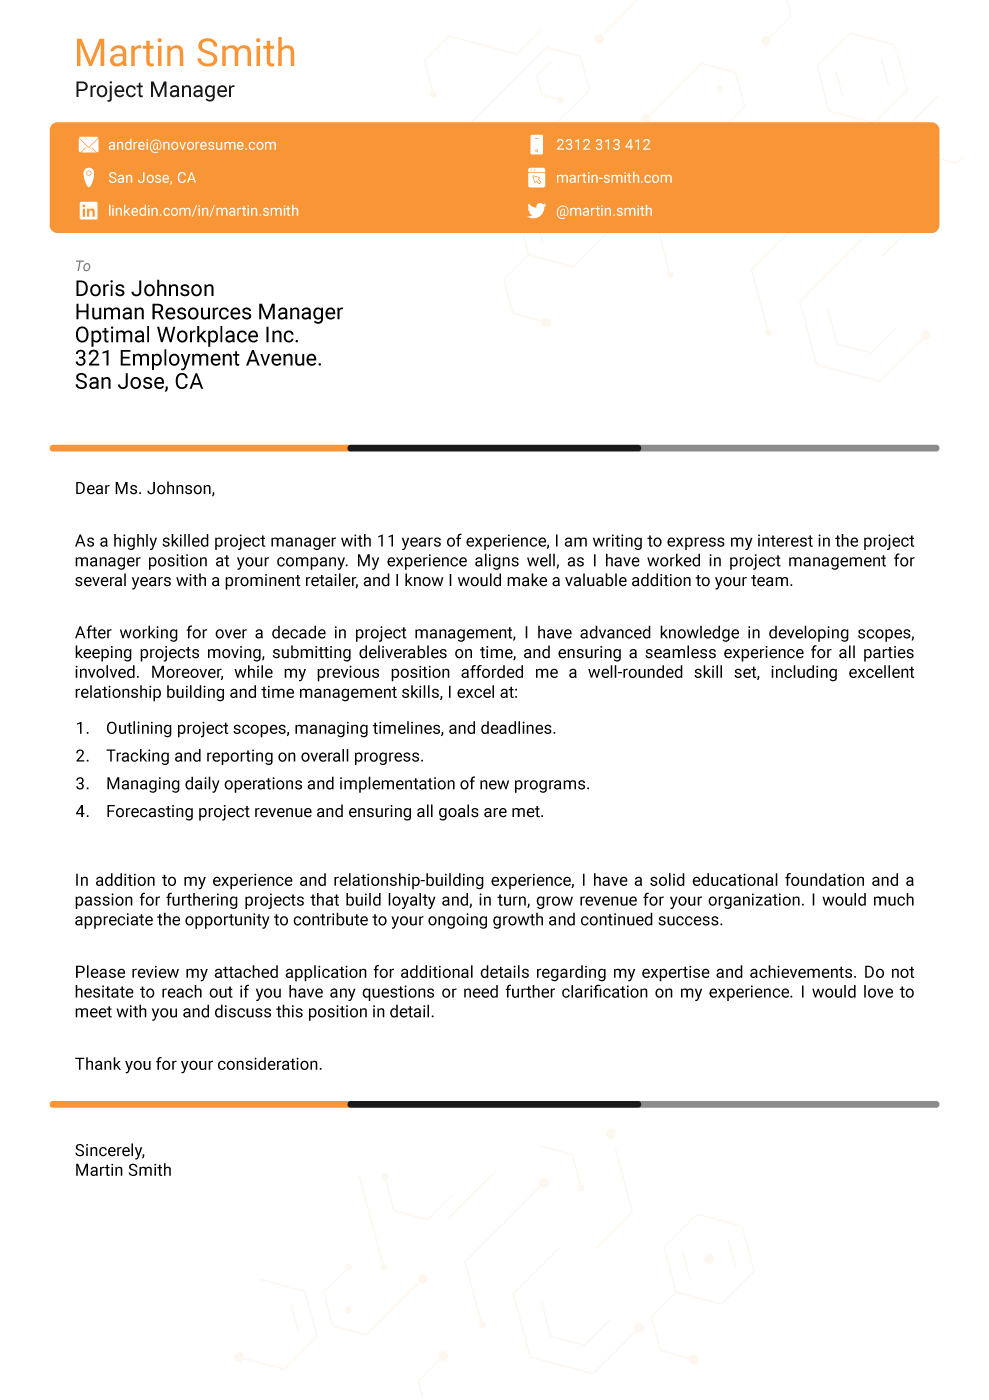 Skill-Based Cover Letter Template